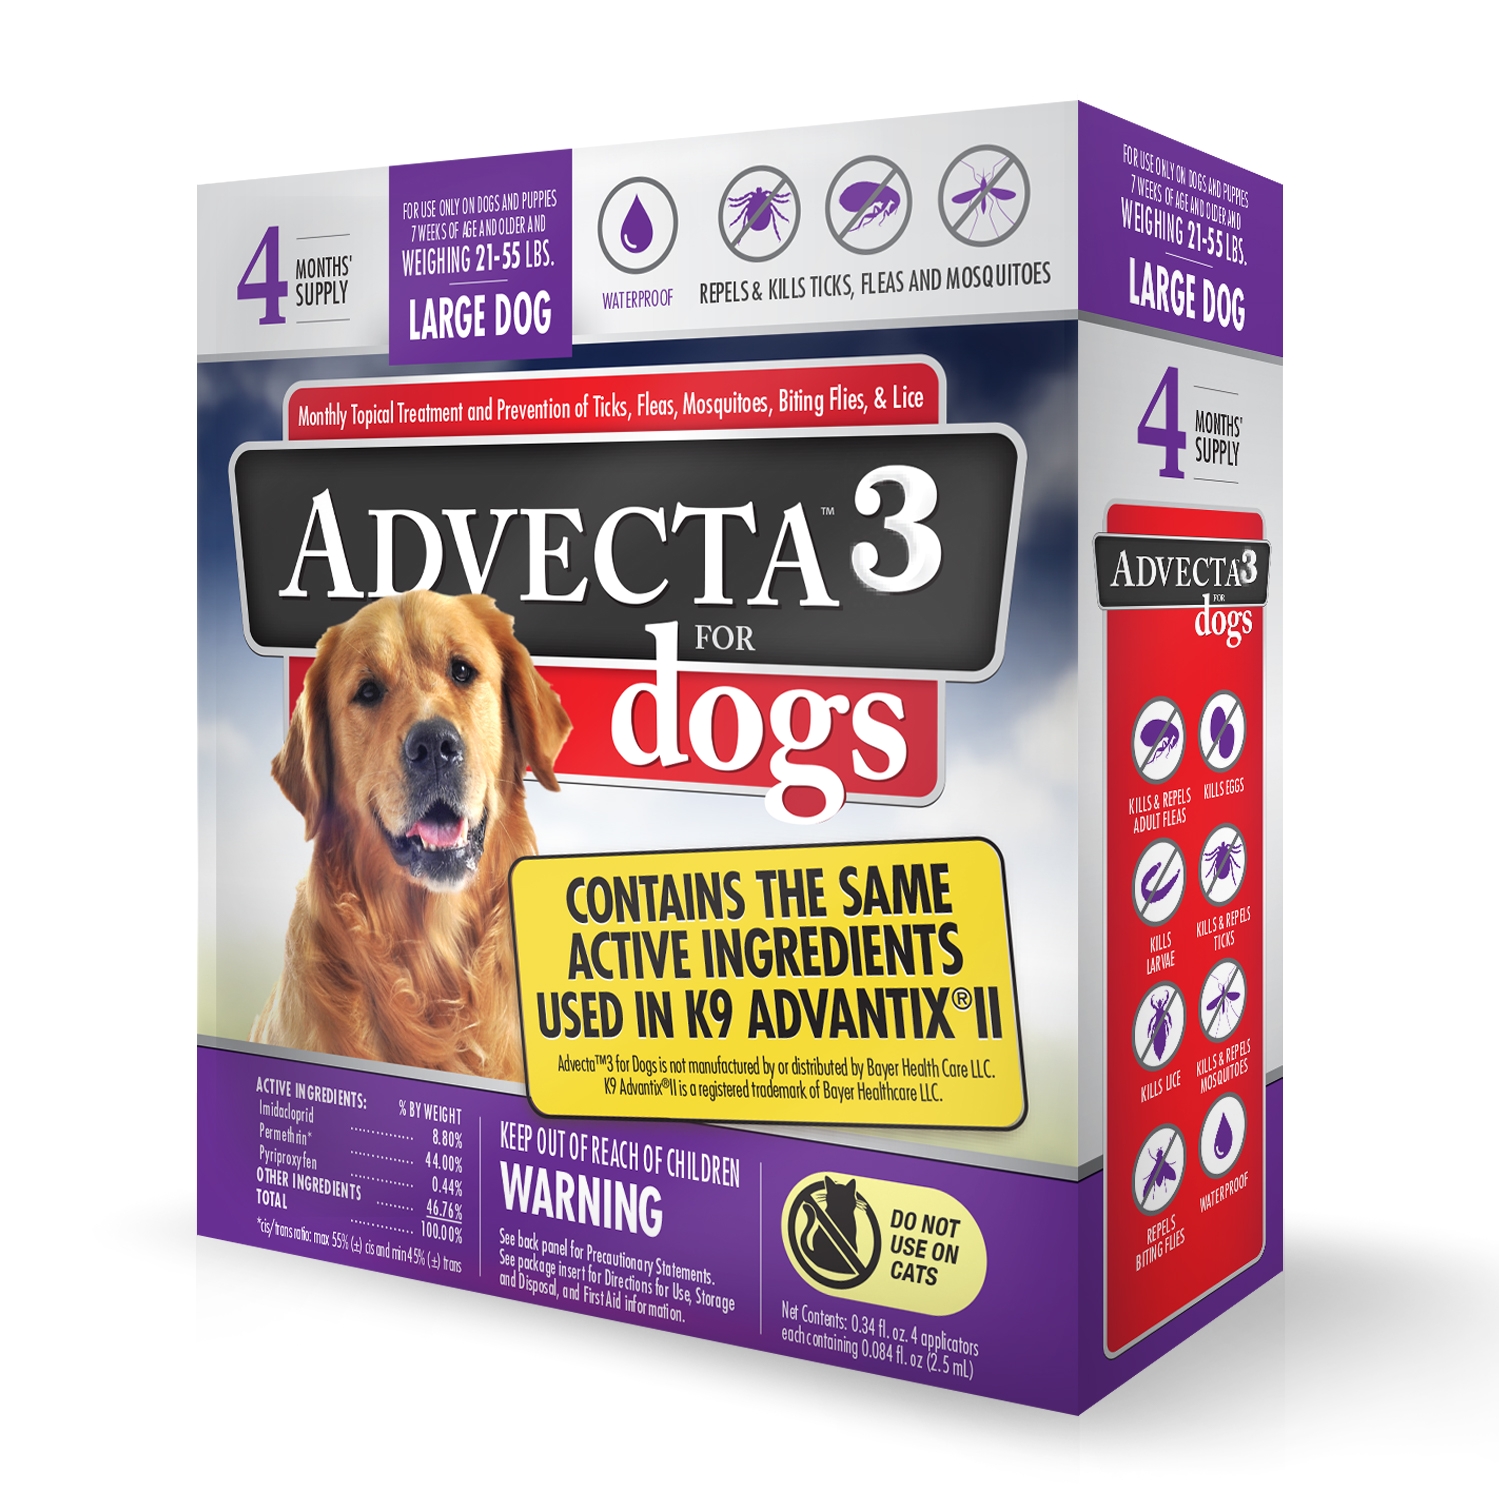 advecta 3 tick flea and mosquito repellent and treatment for large dogs 4 monthly doses walmart com